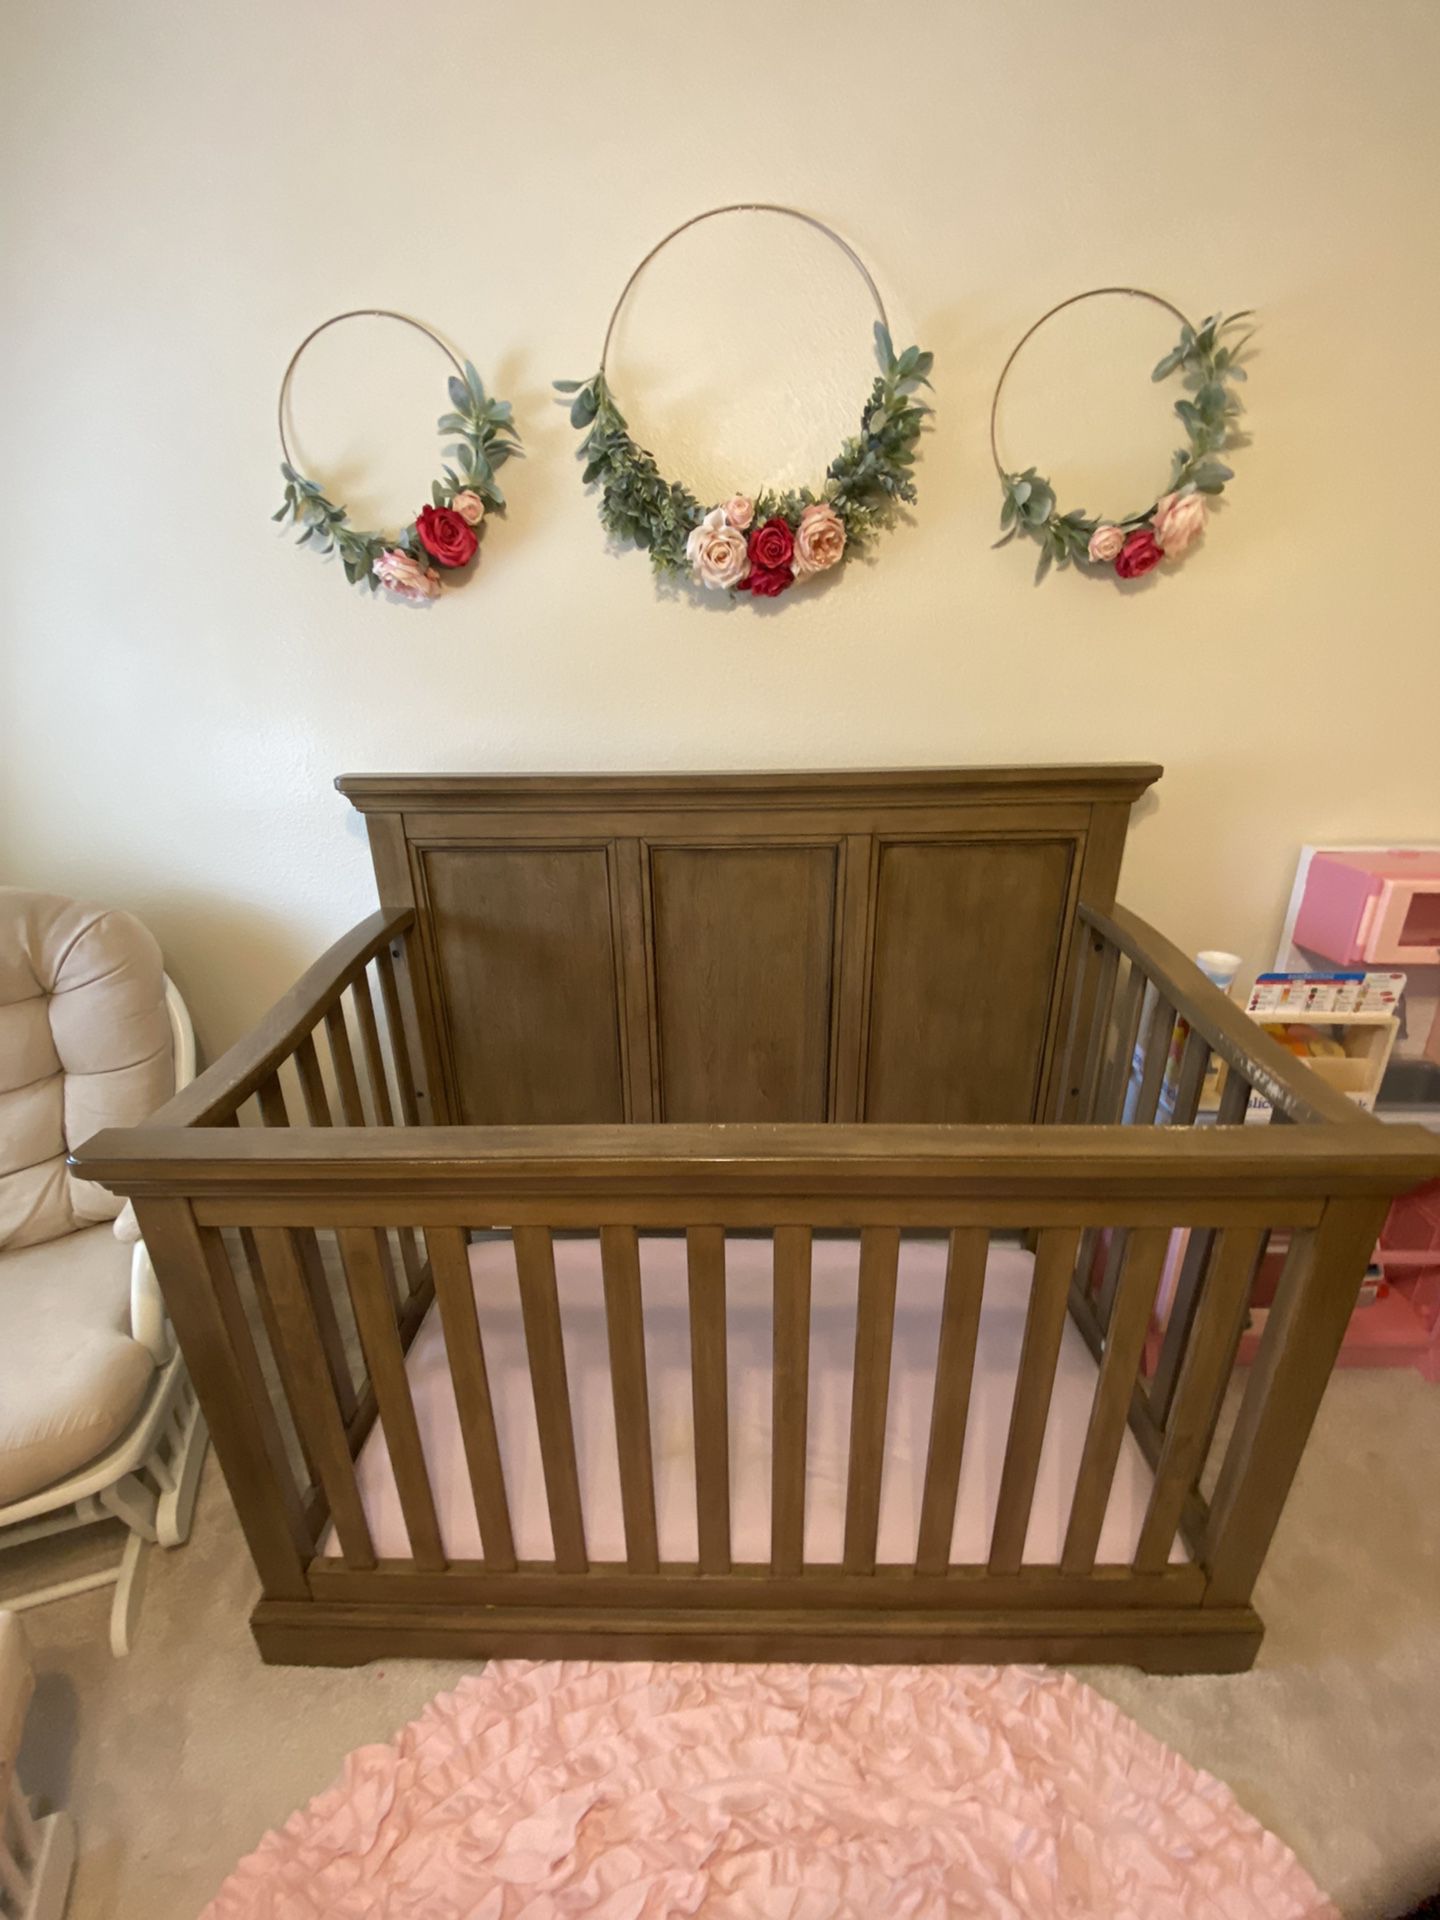 Westwood Crib and Brand New Toddler Rail